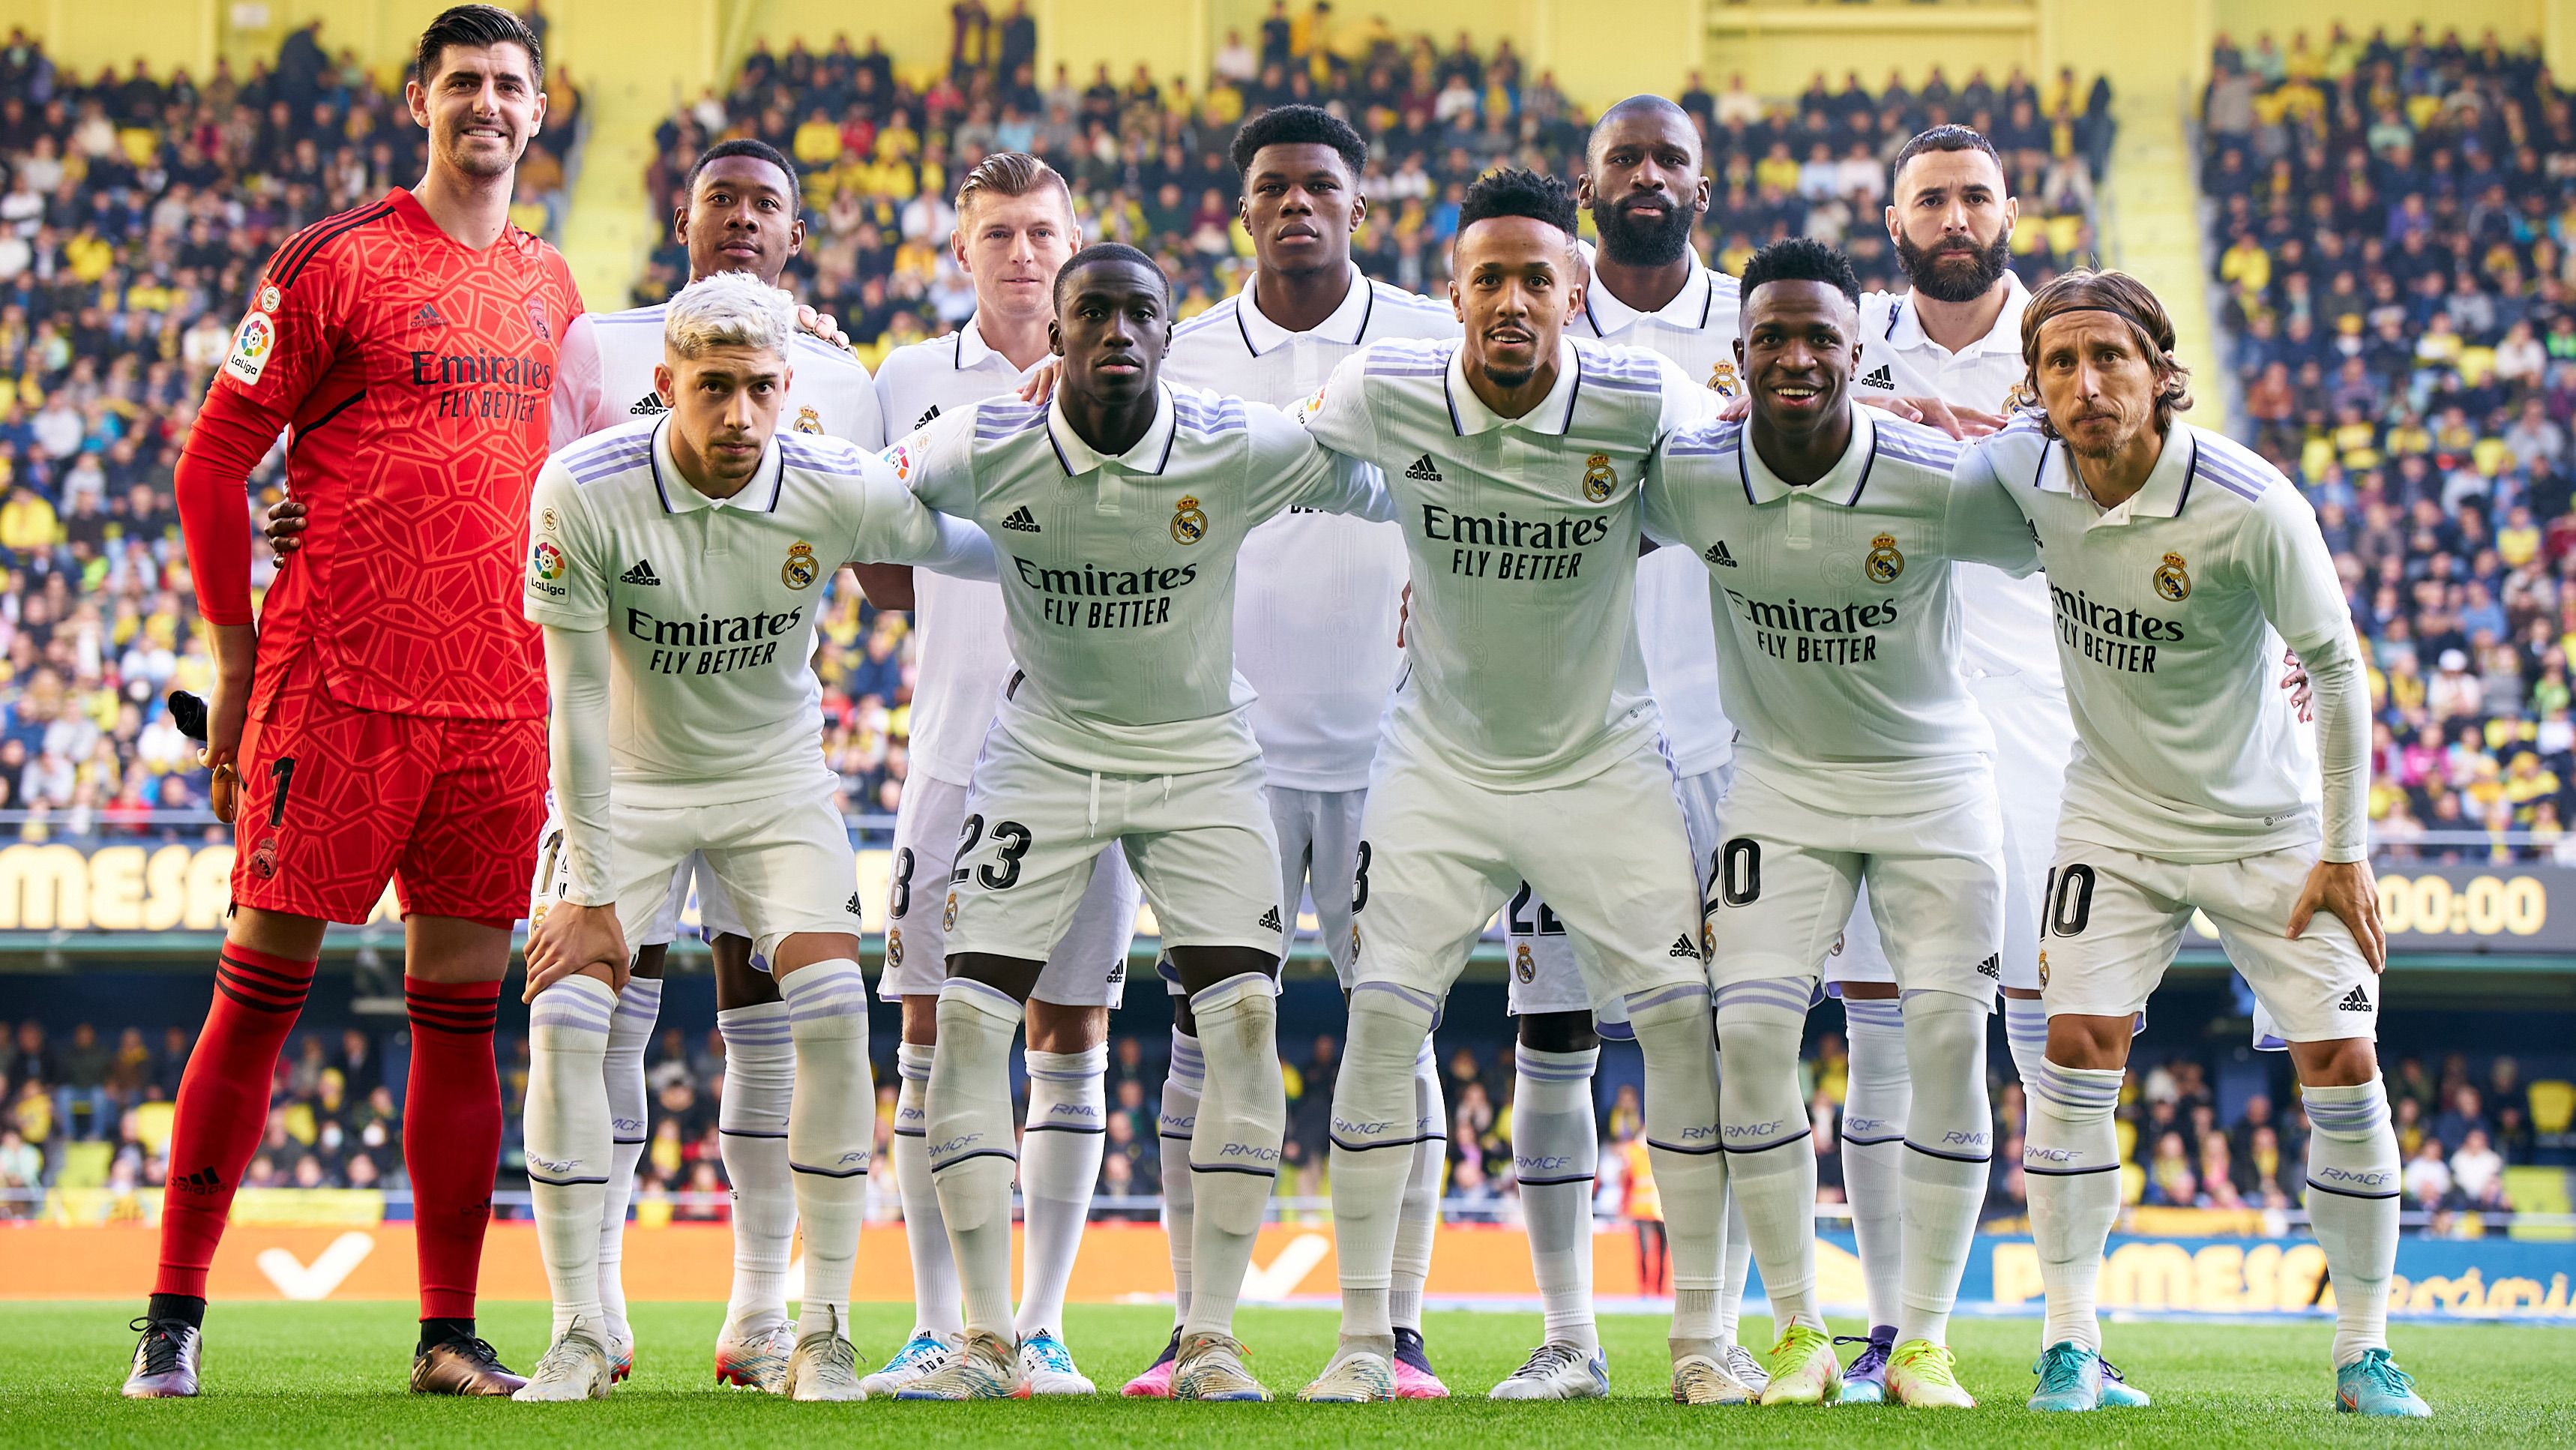 The Real Madrid team line up for a photo prior to kick off during the LaLiga Santander match between Villarreal CF and Real Madrid CF at Estadio de la Ceramica on January 07, 2023 in Villarreal, Spain. (Photo by Manuel Queimadelos/Quality Sport Images/Getty Images)